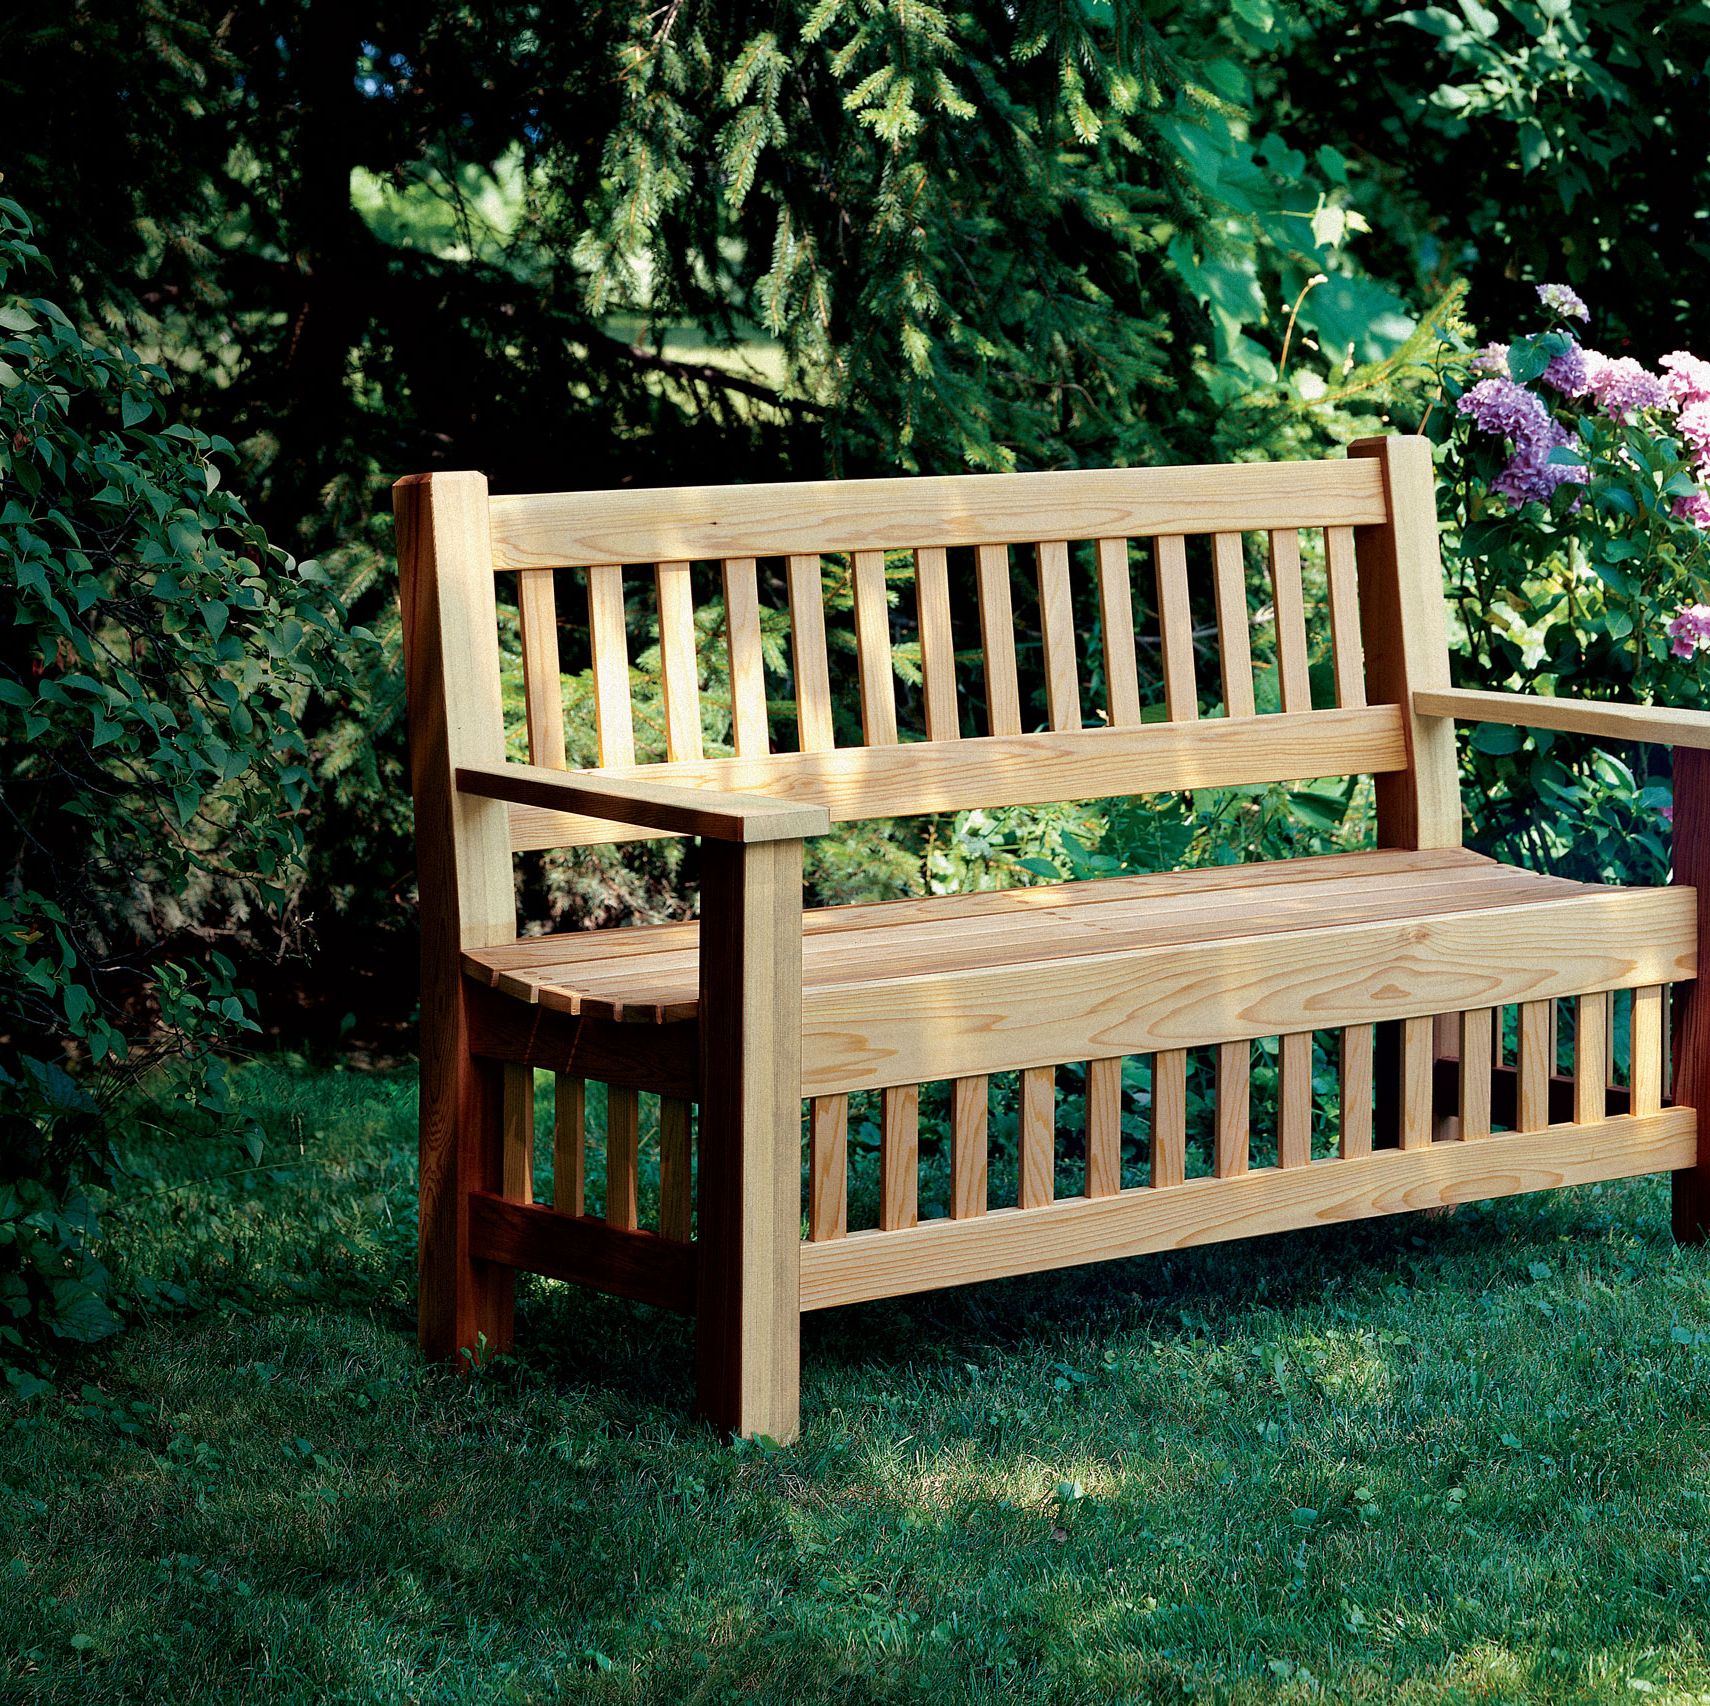 Two Garden Benches That'll Take Your Backyard To the Next Level